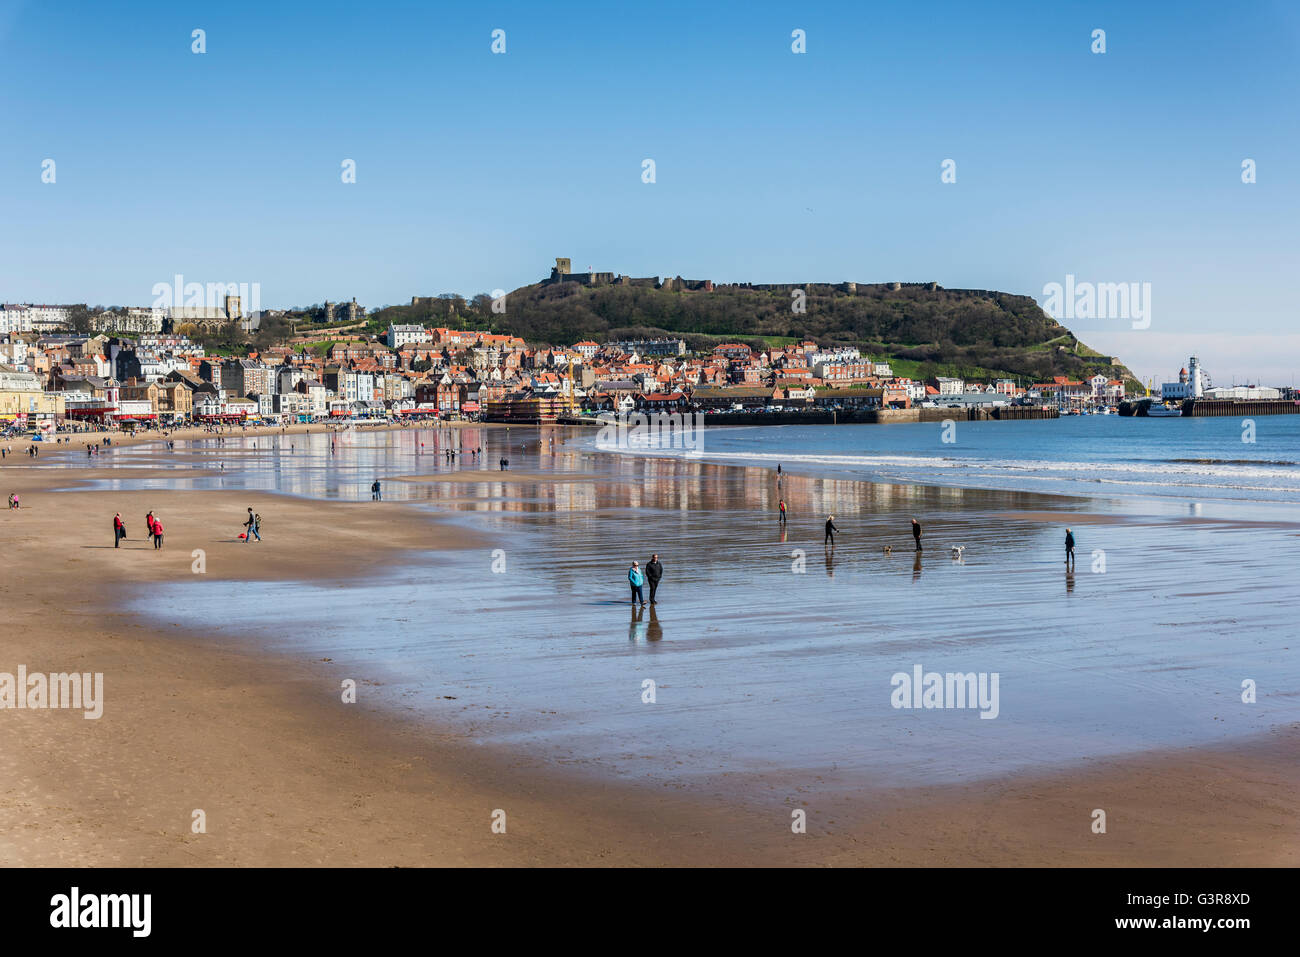 People enjoying a bright, sunny, spring day on Scarborough's south bay beach Stock Photo